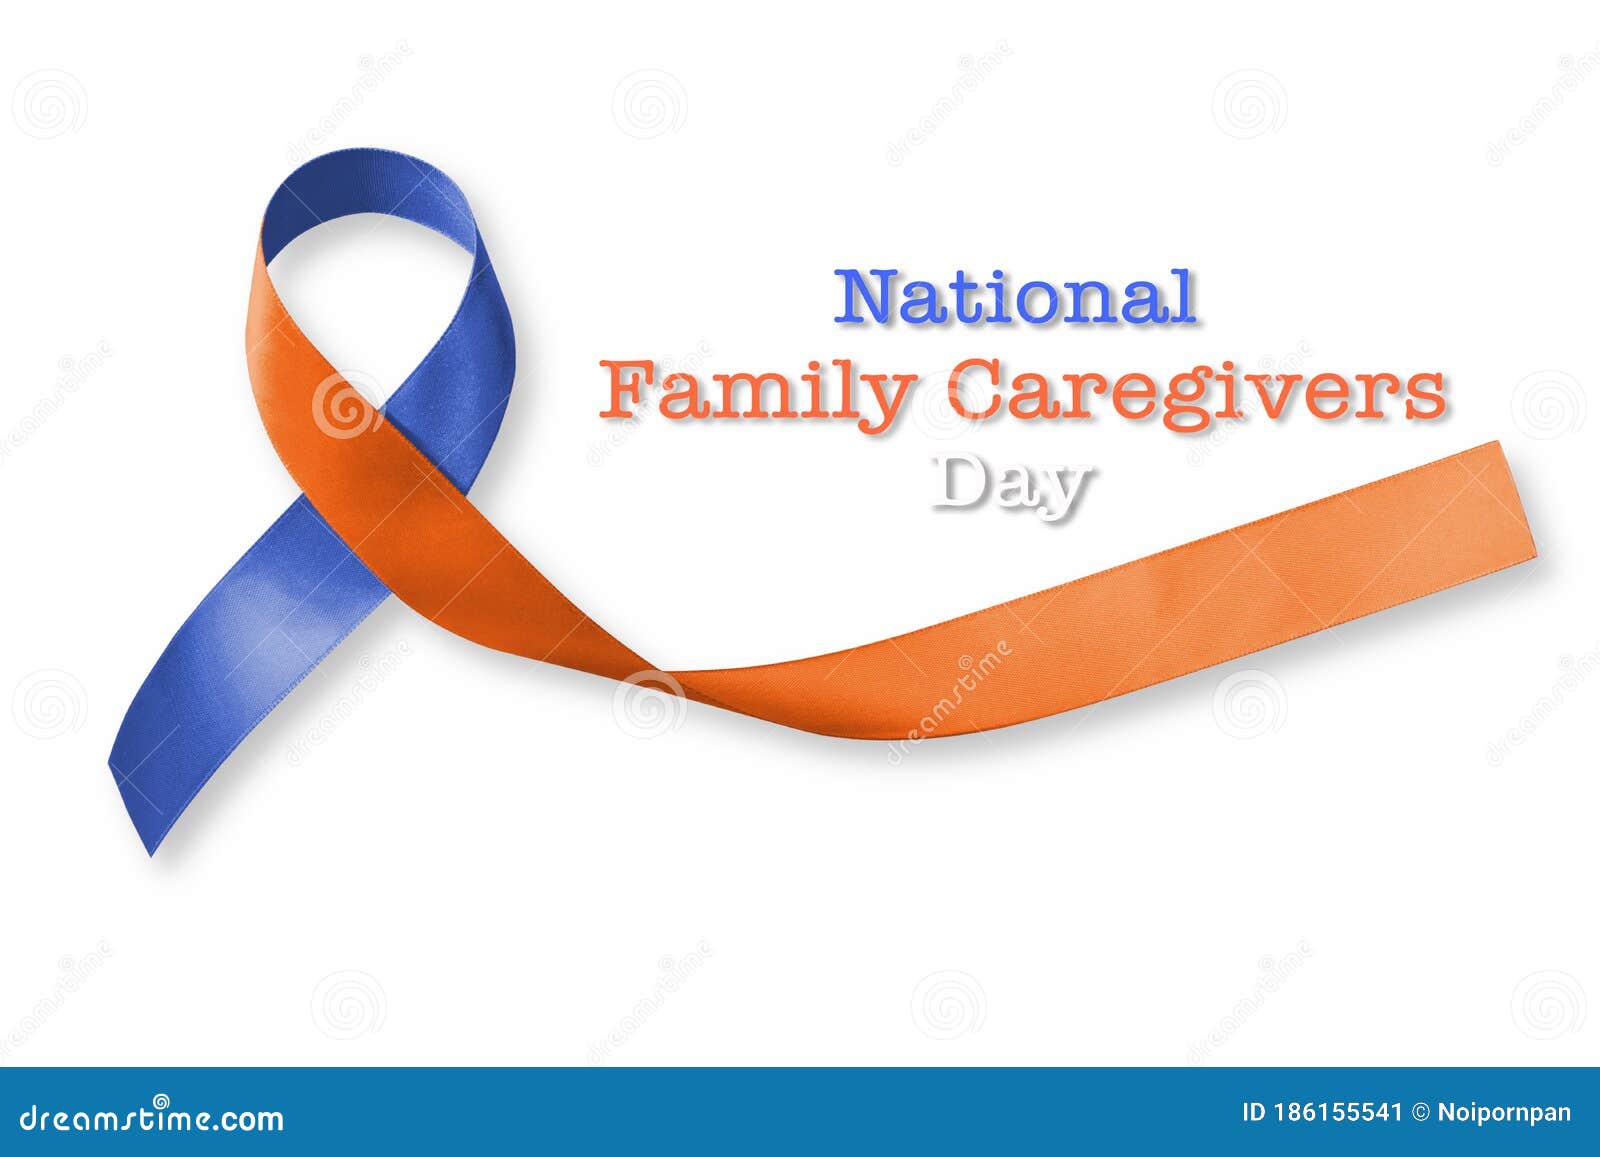 national family caregivers awareness in orange navy blue color fabric ribbon  on white background clipping path